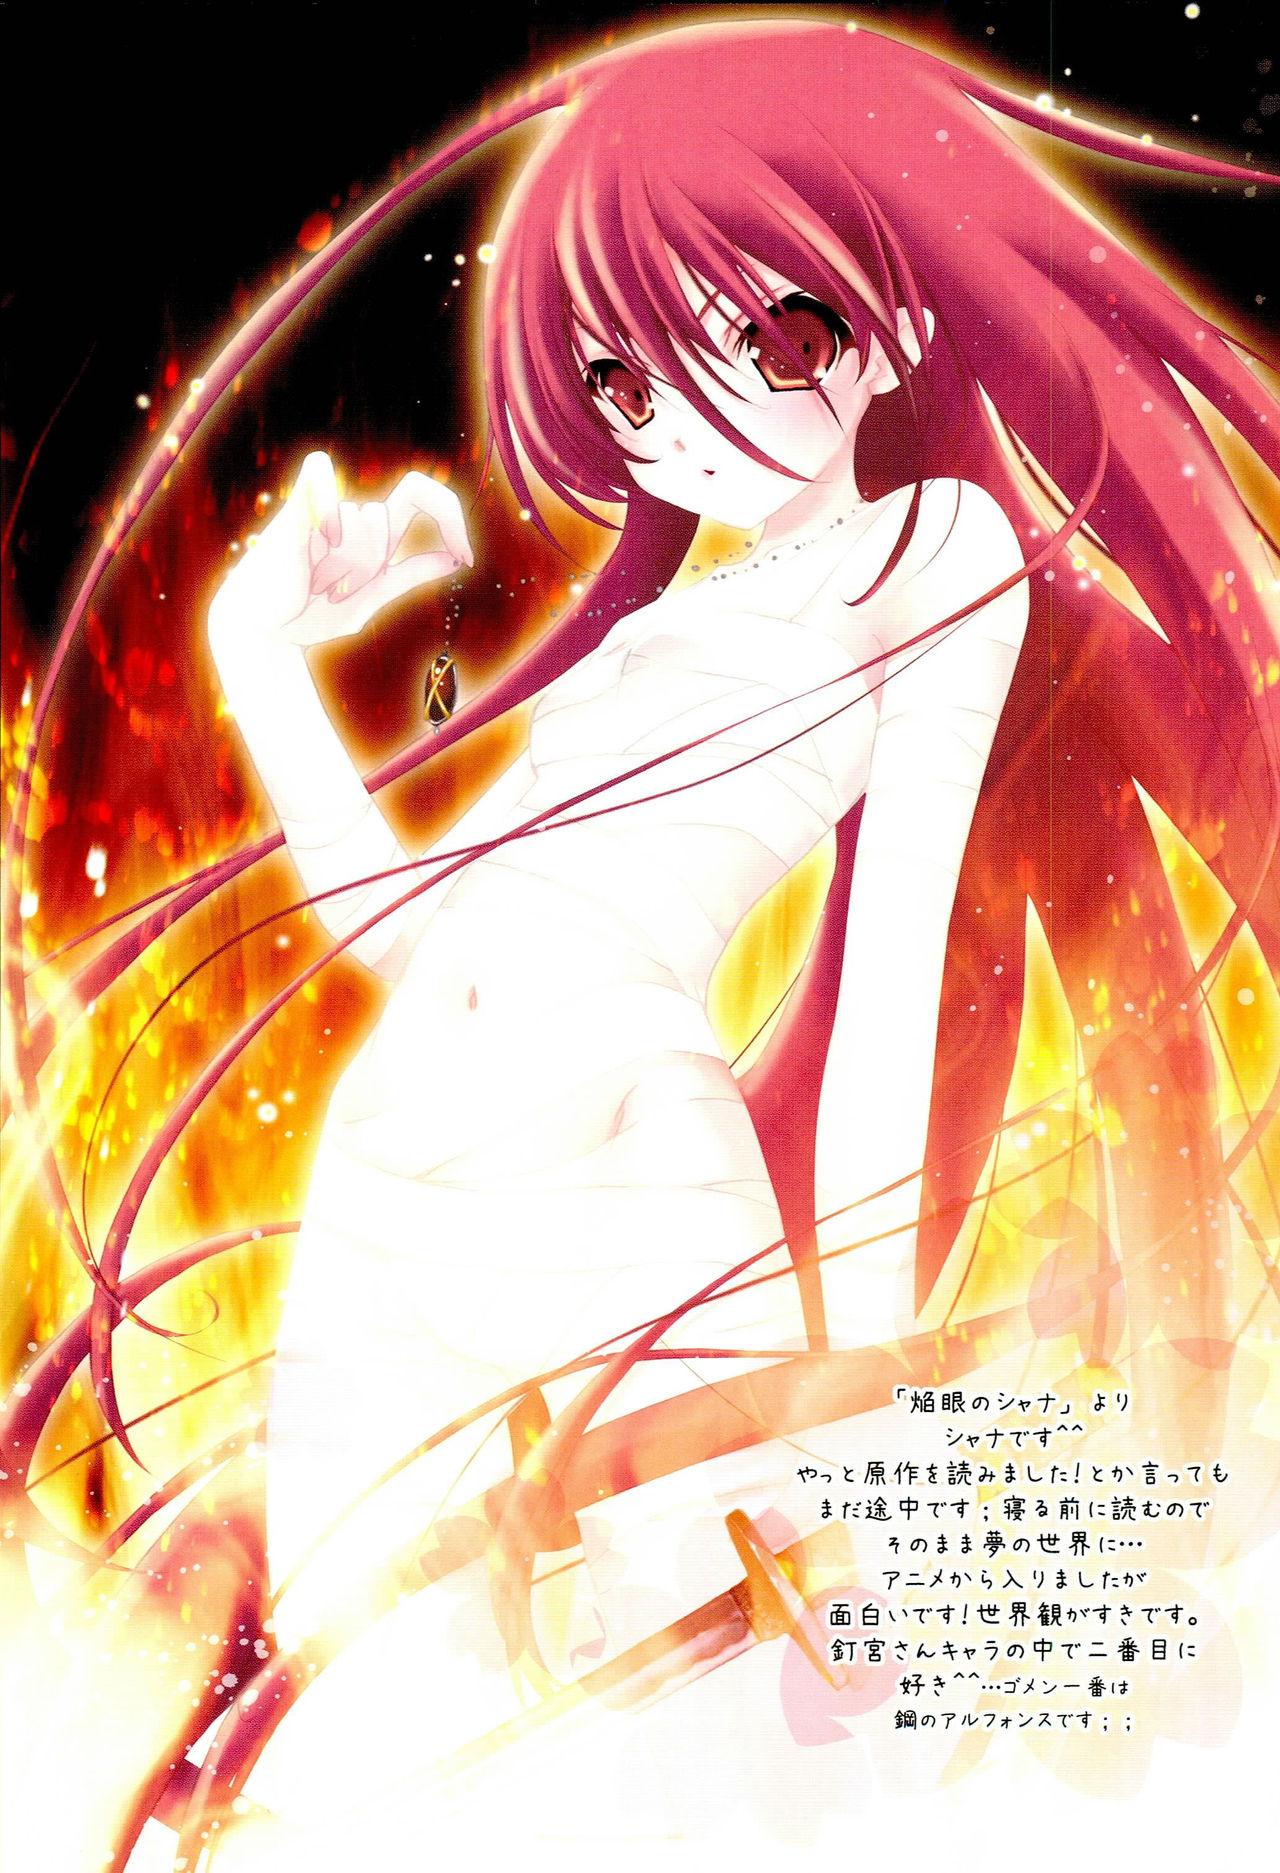 Stripping Face to Face - Shakugan no shana Spread - Page 2